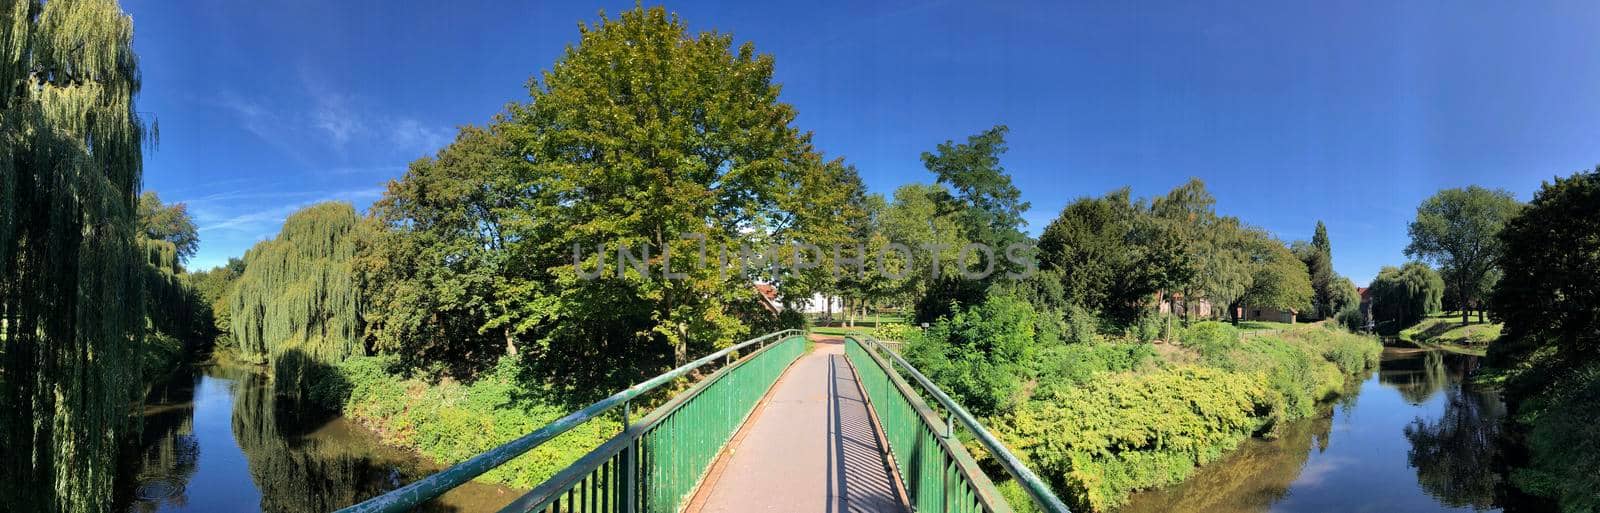 Panorama from a bridge over the Berkel river in Vreden, Germany